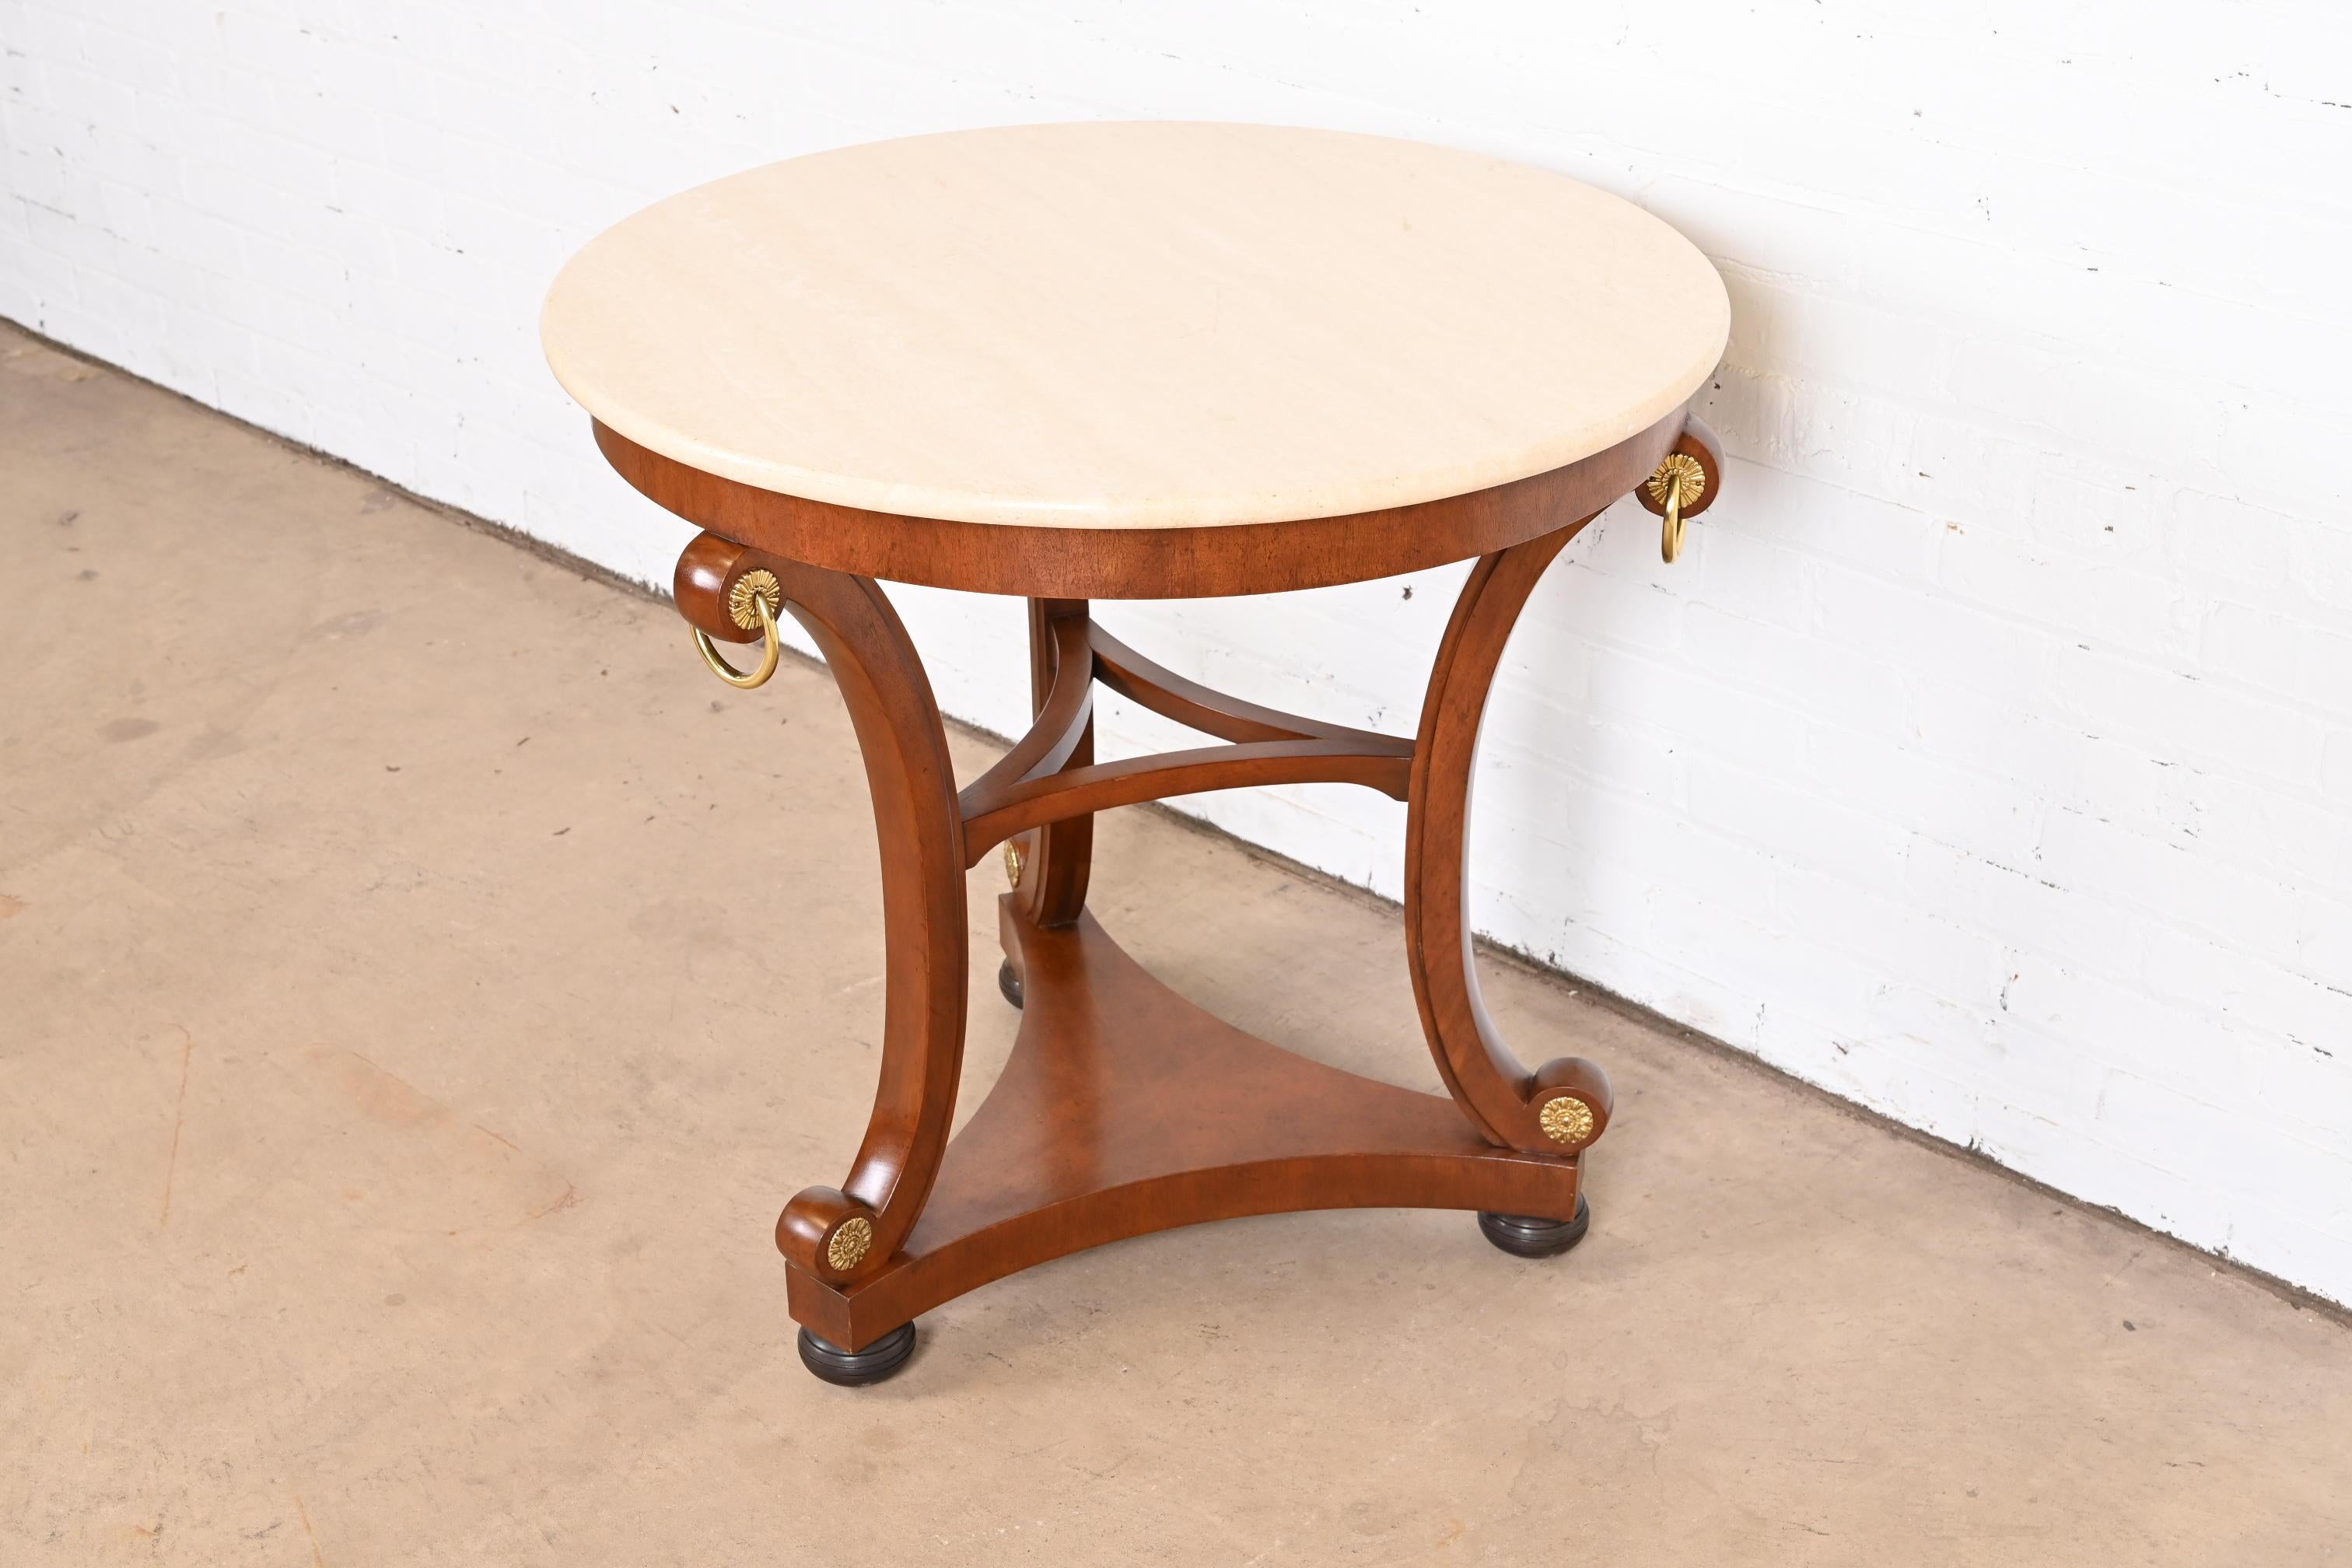 Baker Furniture Stately Homes Regency Carved Mahogany Marble Top Center Table In Good Condition For Sale In South Bend, IN